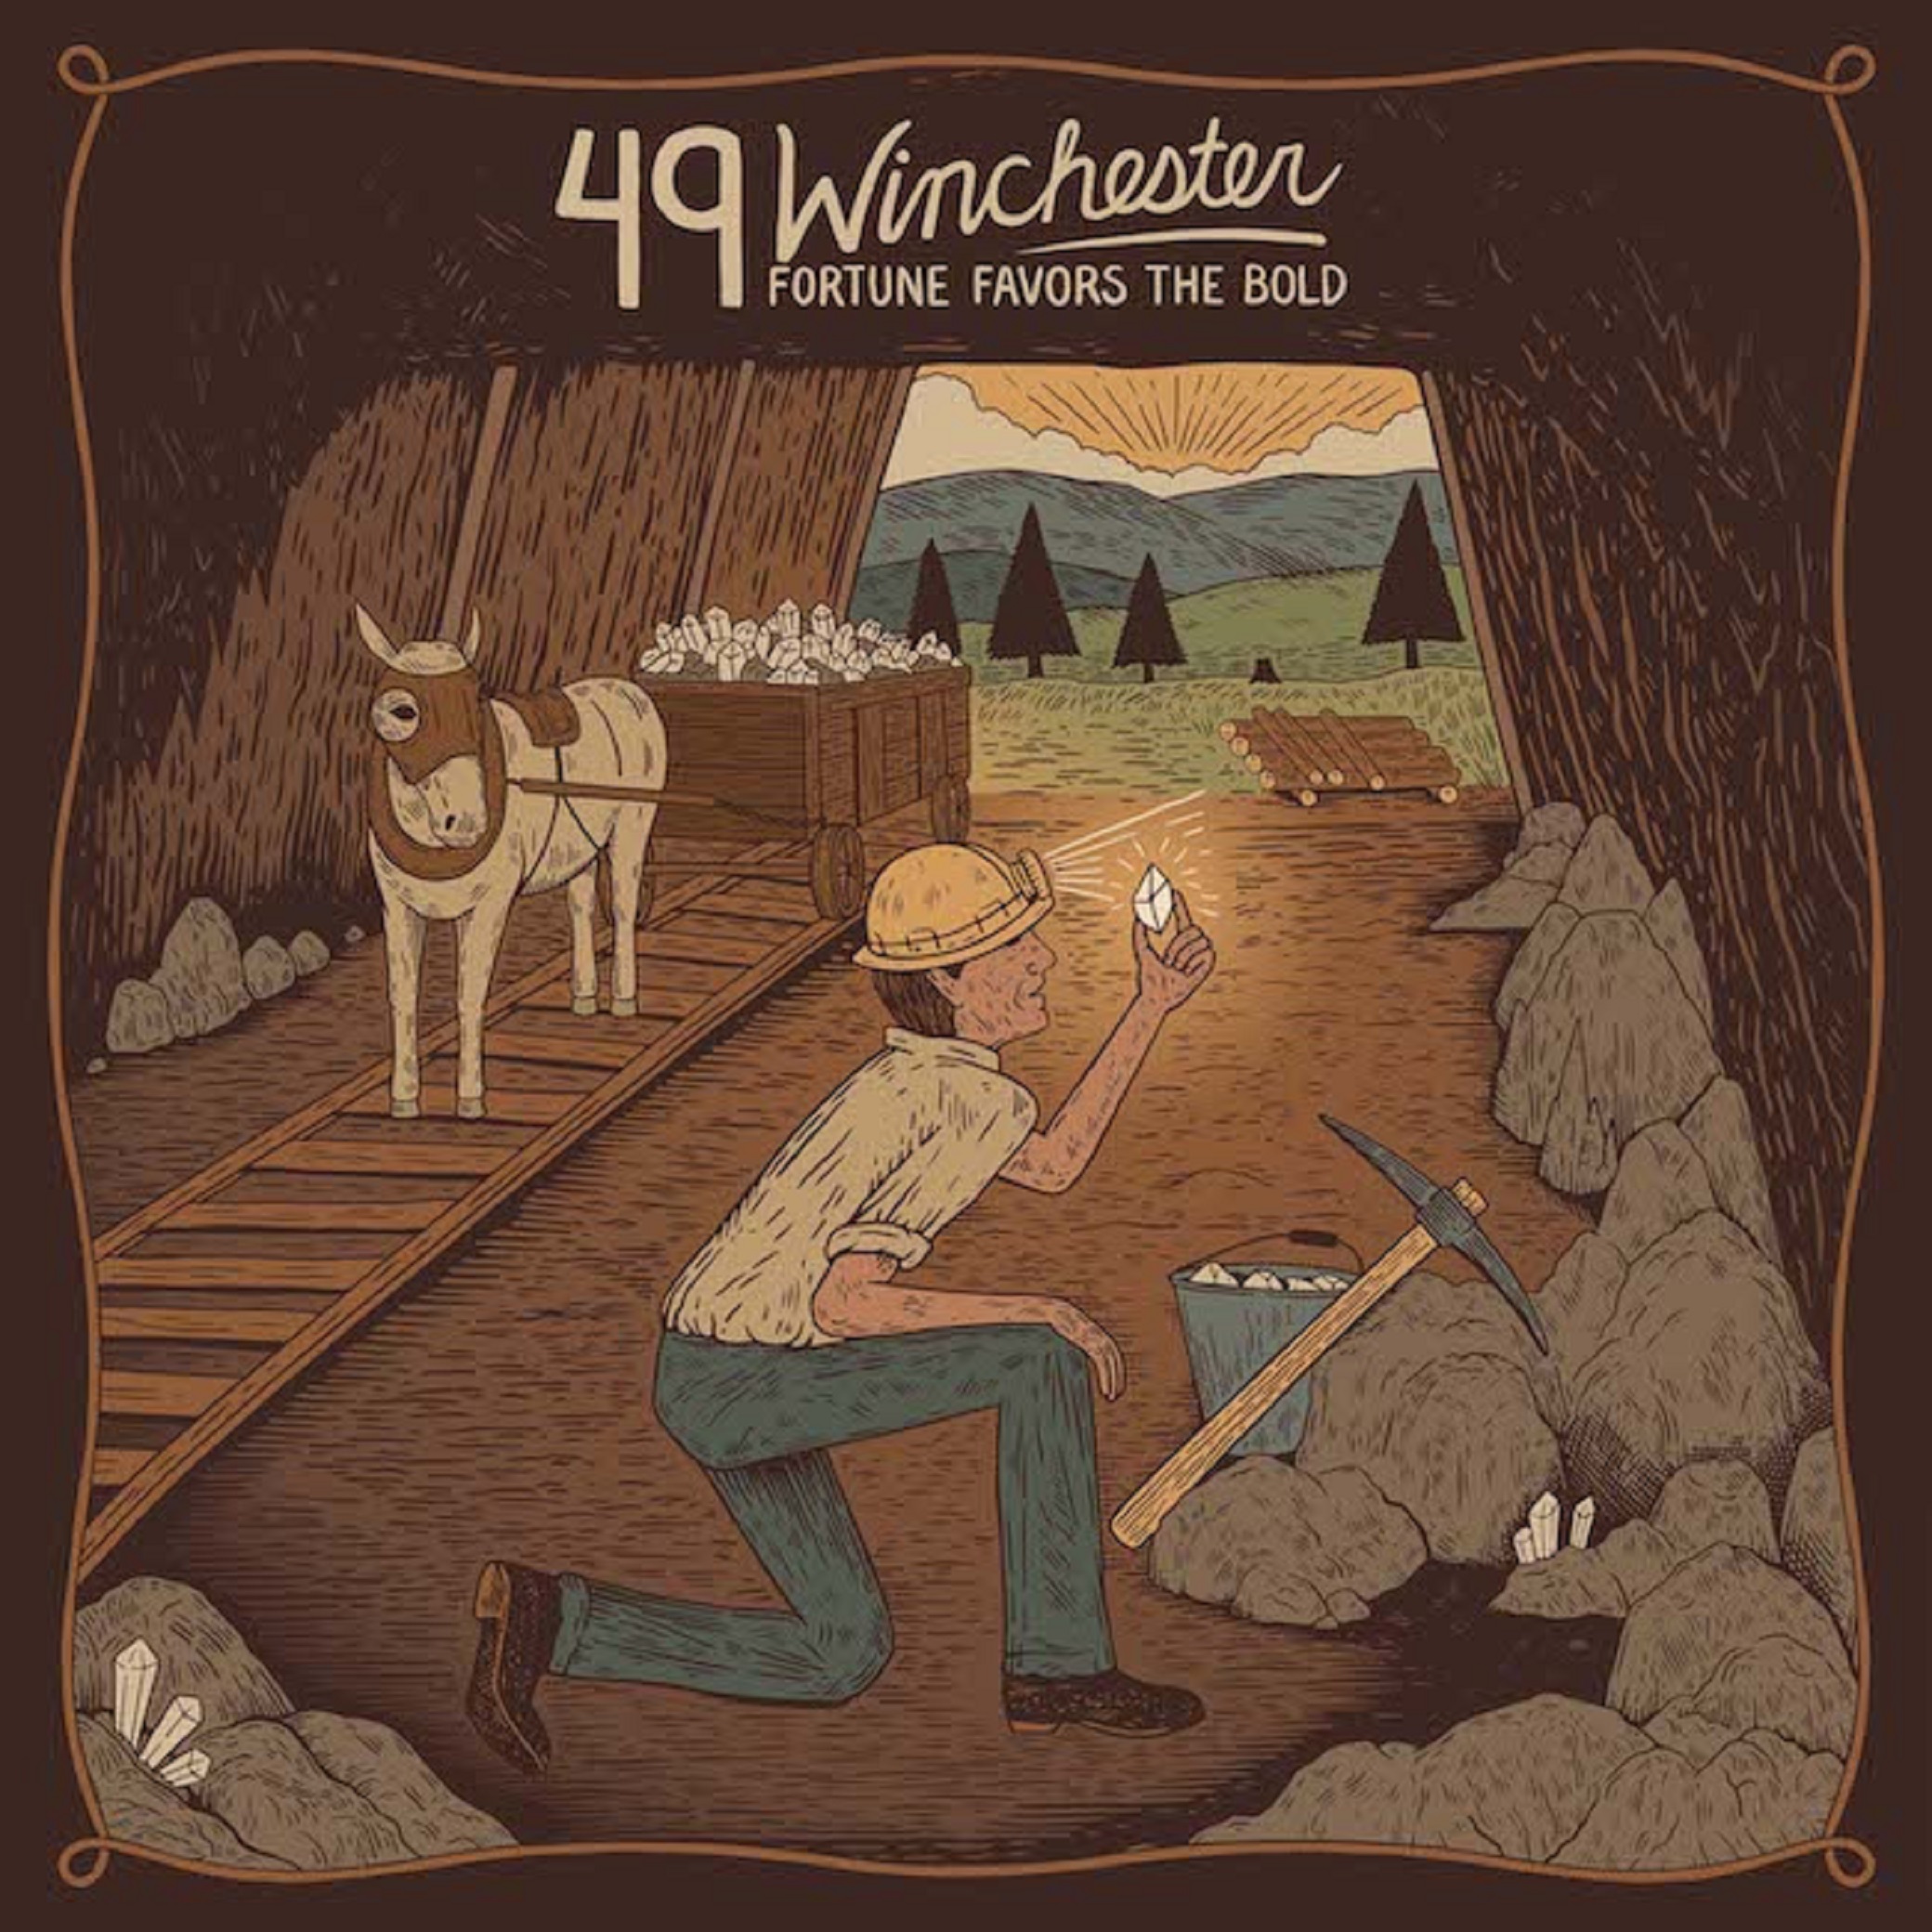 49 Winchester To Release "Fortune Favors The Bold" May 13th